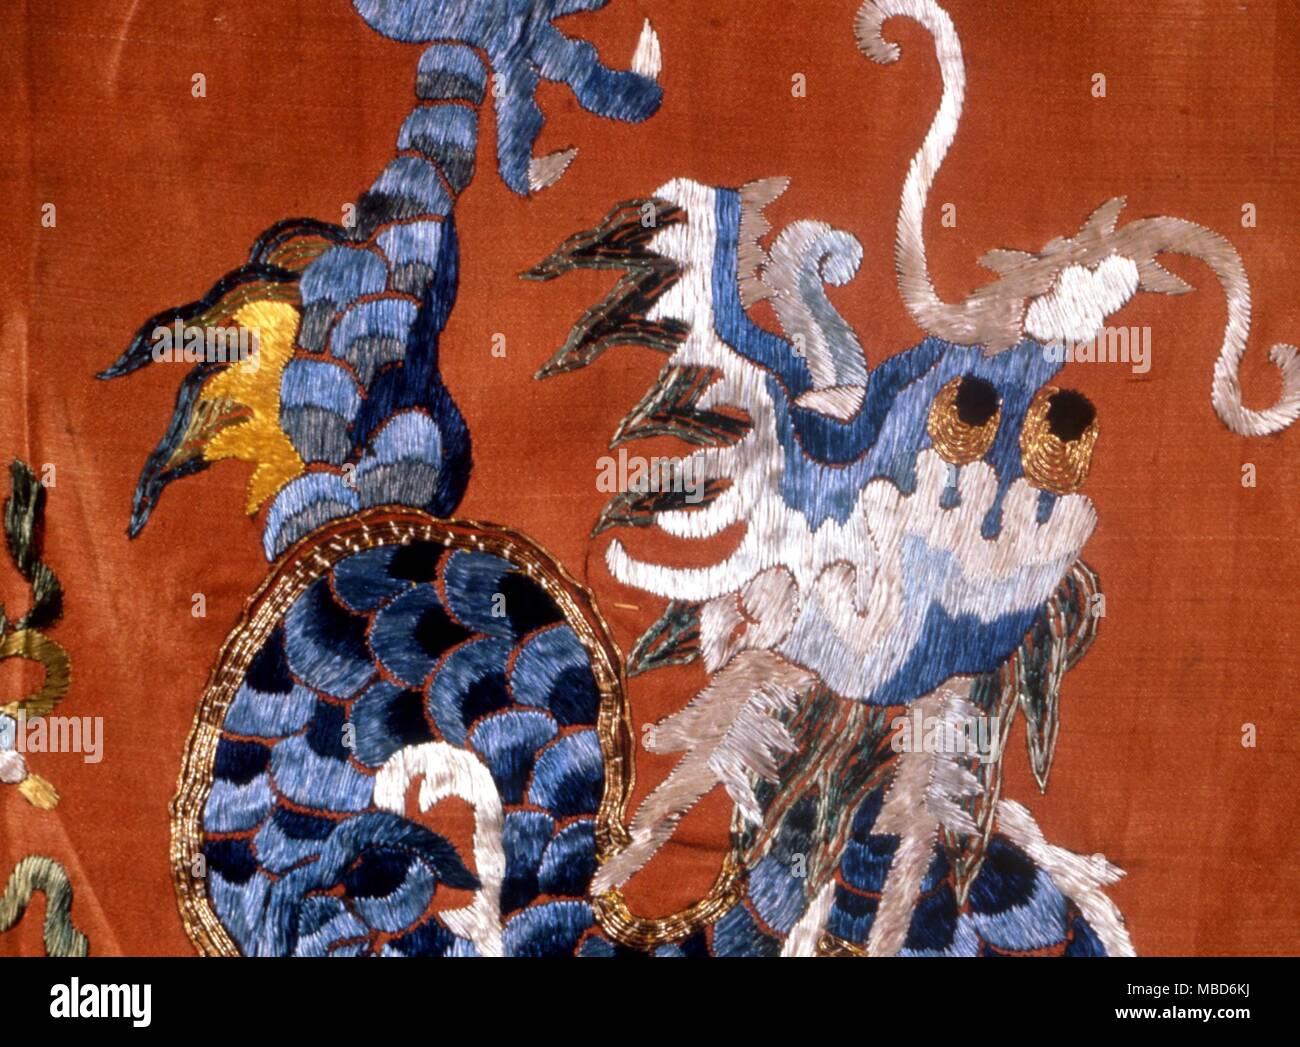 DRAGON - Blue dragon - Chinese embroidery late 19th century - private collection Stock Photo